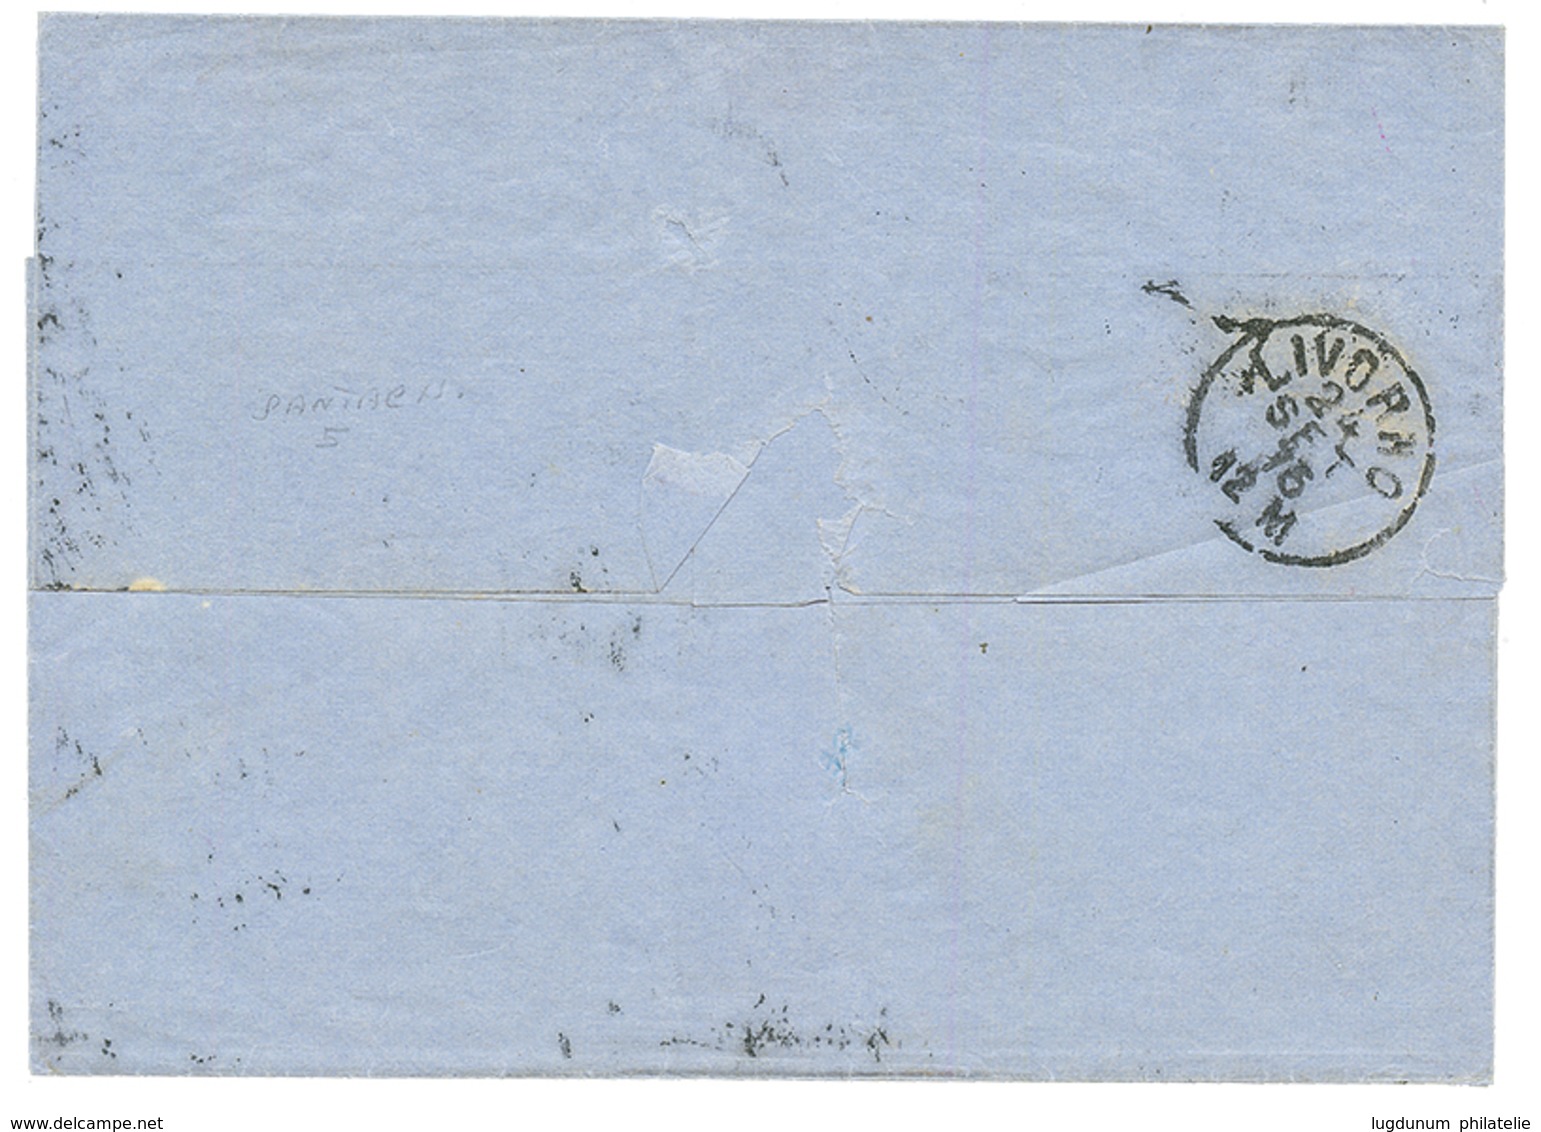 1875 GB 2 1/2d Canc. G06 + BRITISH POST OFFICE BEYROUTH + ITALY 40c ESTERO Canc. BRINDISI On Cover From BEYROUTH SYRIA T - Unclassified